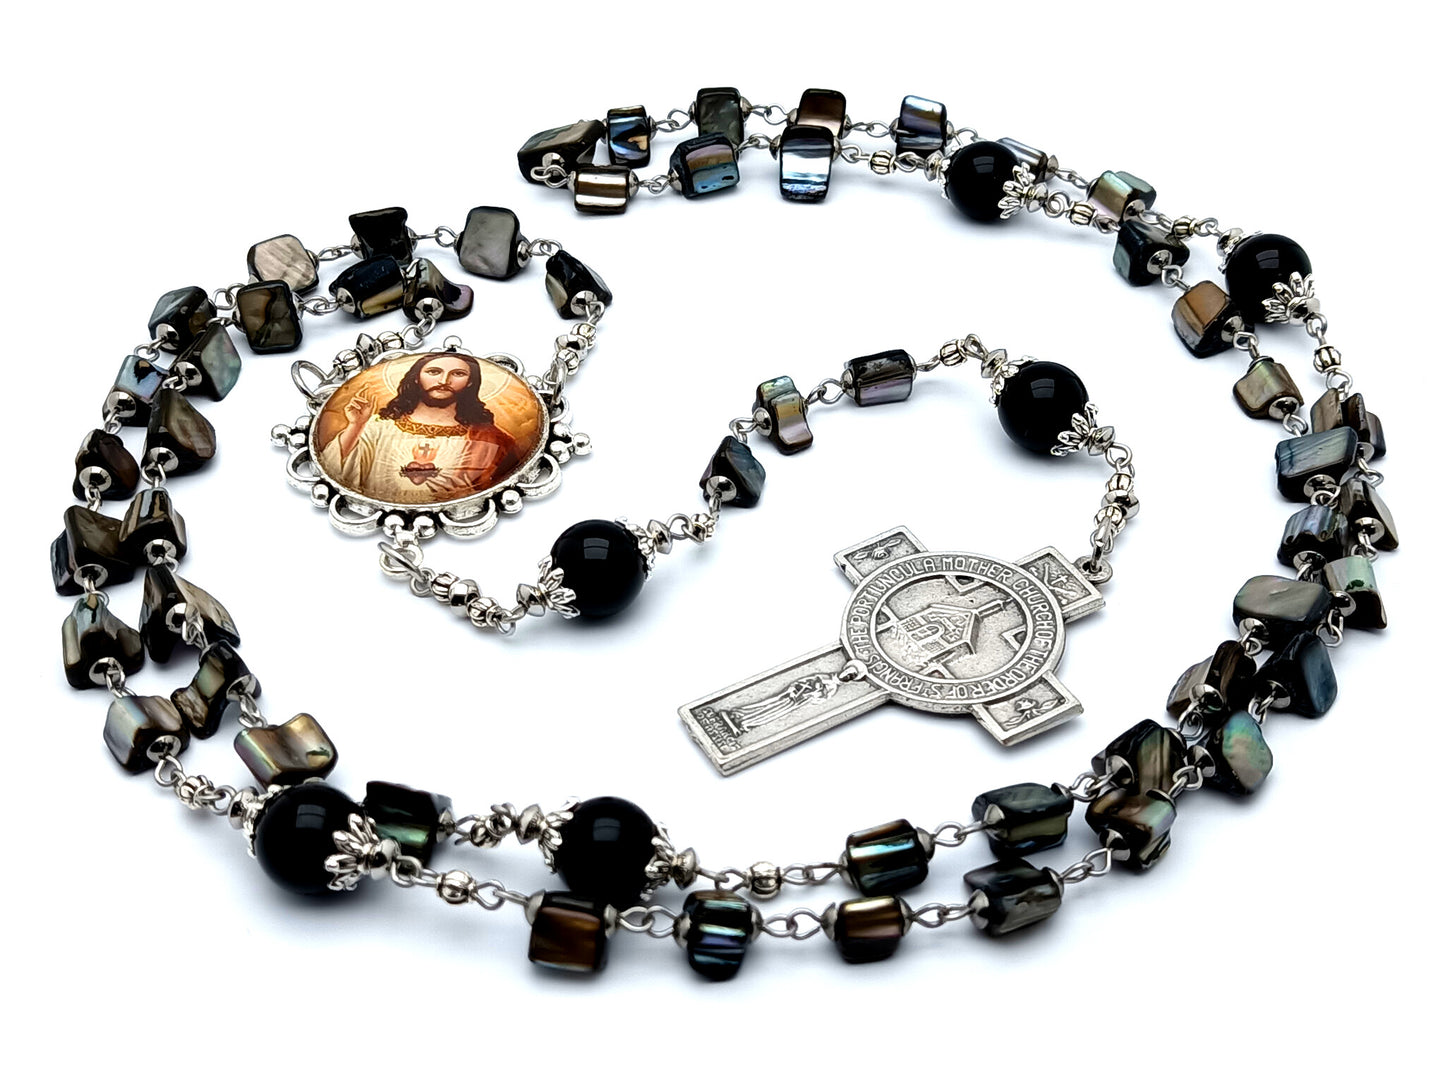 Sacred Heart of Jesus unique rosary beads with shell and onyx gemstone beads and Saint Francis Portuncula Mother church cross with blessing prayer.